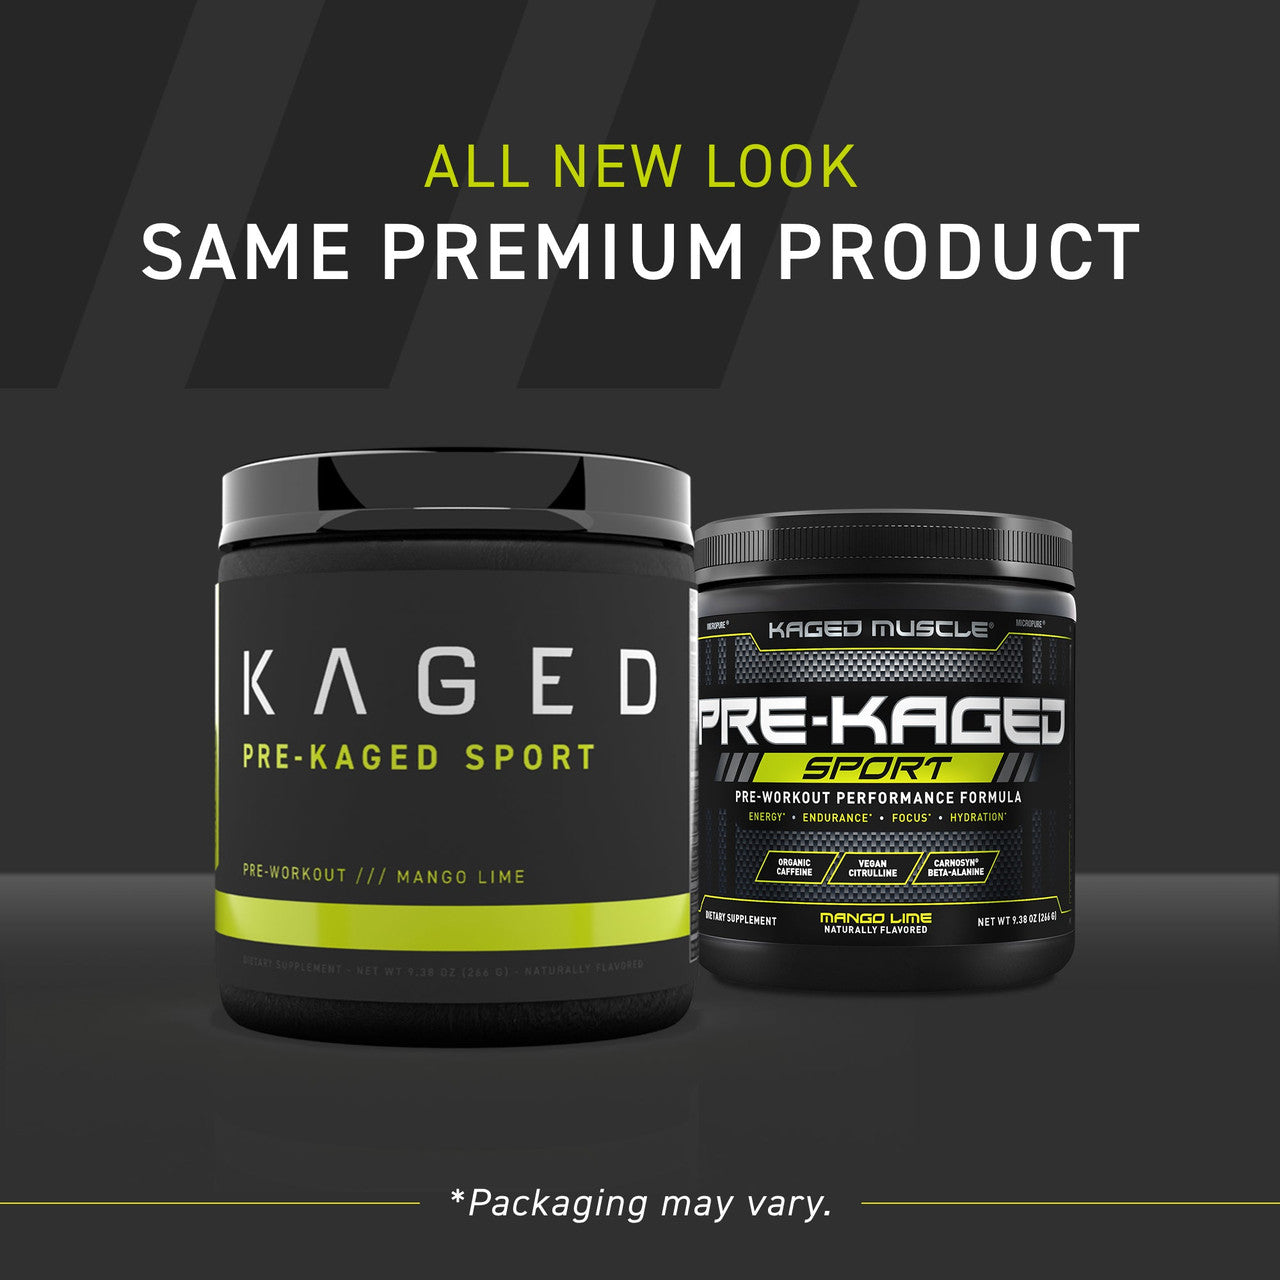 Kaged Muscle Pre-Kaged Sport  New Premium Look